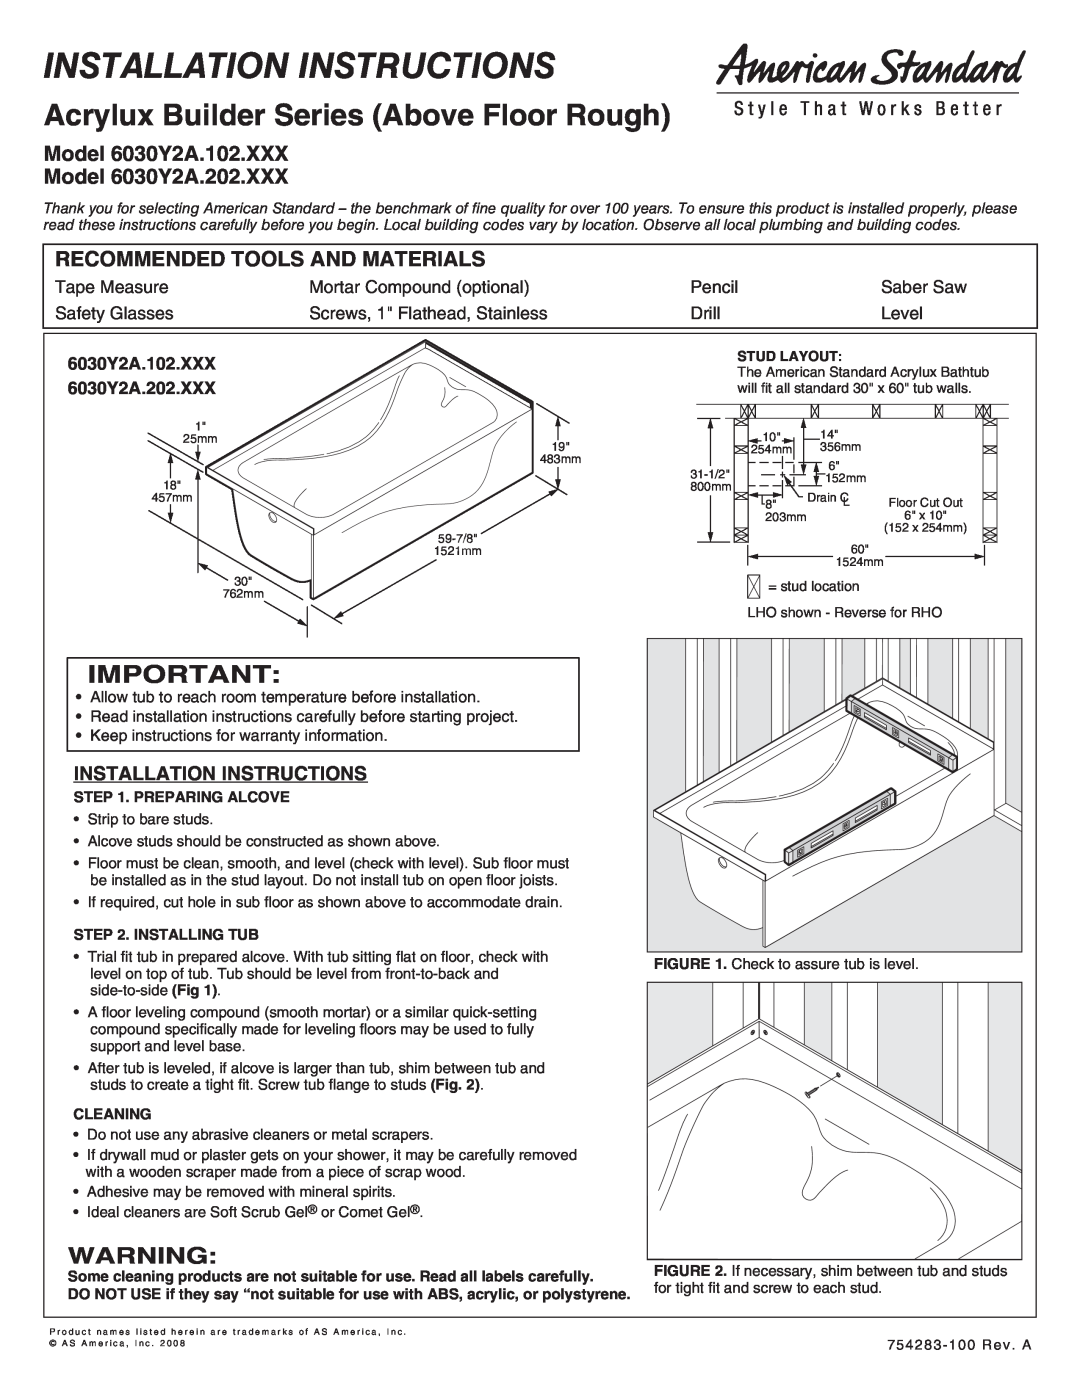 American Standard 6030Y2A.202.XXX installation instructions Installation Instructions, Recommended Tools And Materials 